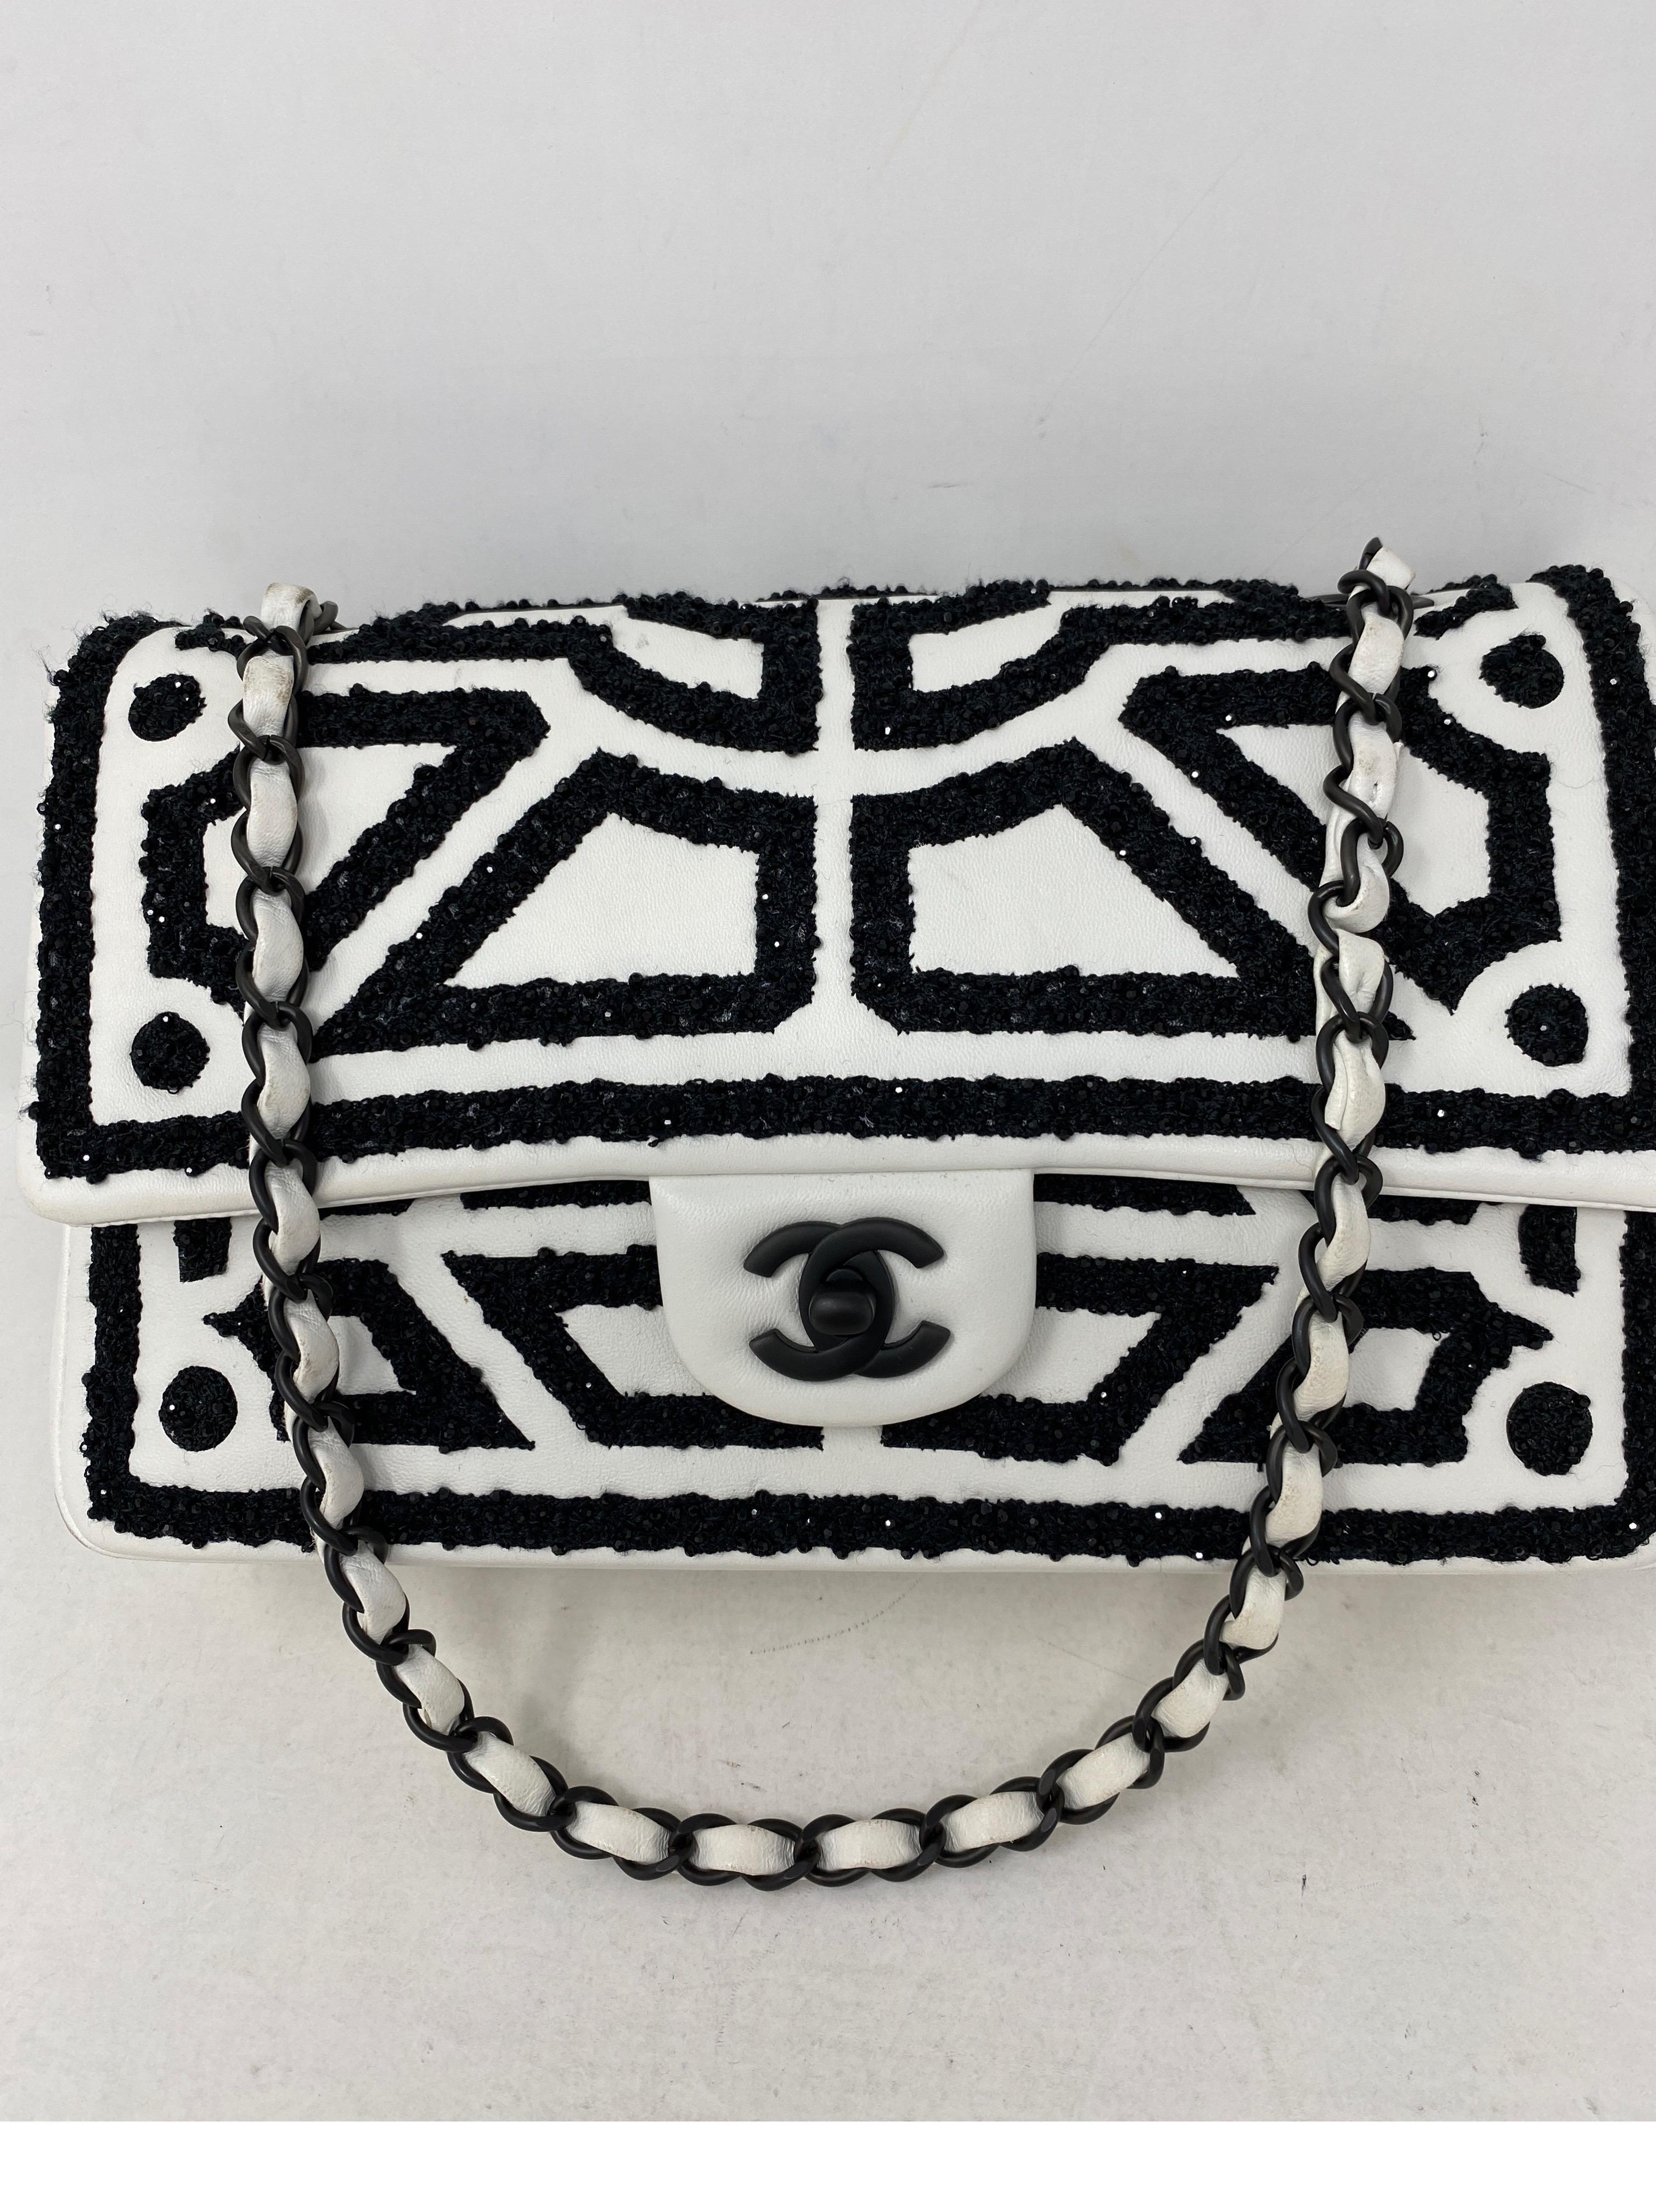 Chanel White and Black Double Flap Bag. Beautiful white leather with black eimbroidered details and pattern. Black hardware. Medium size classic. Black leather interior. Excellent condition. Rare and limited collection. Includes authenticity card.